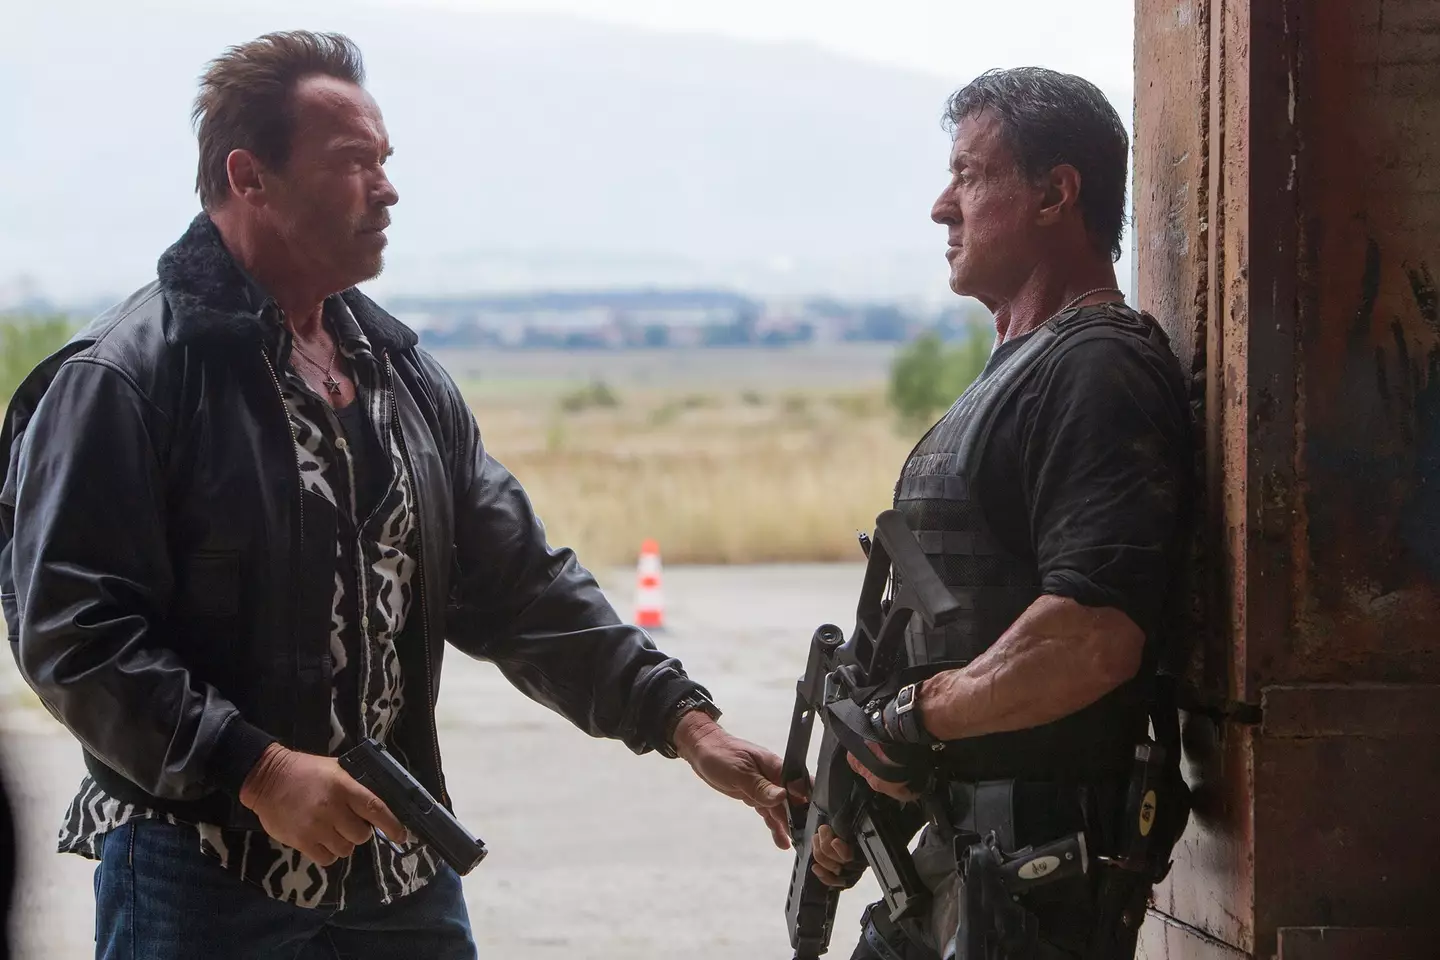 Sylvester Stallone and Arnold Schwarzenegger had a ‘violent hatred’ of one another.